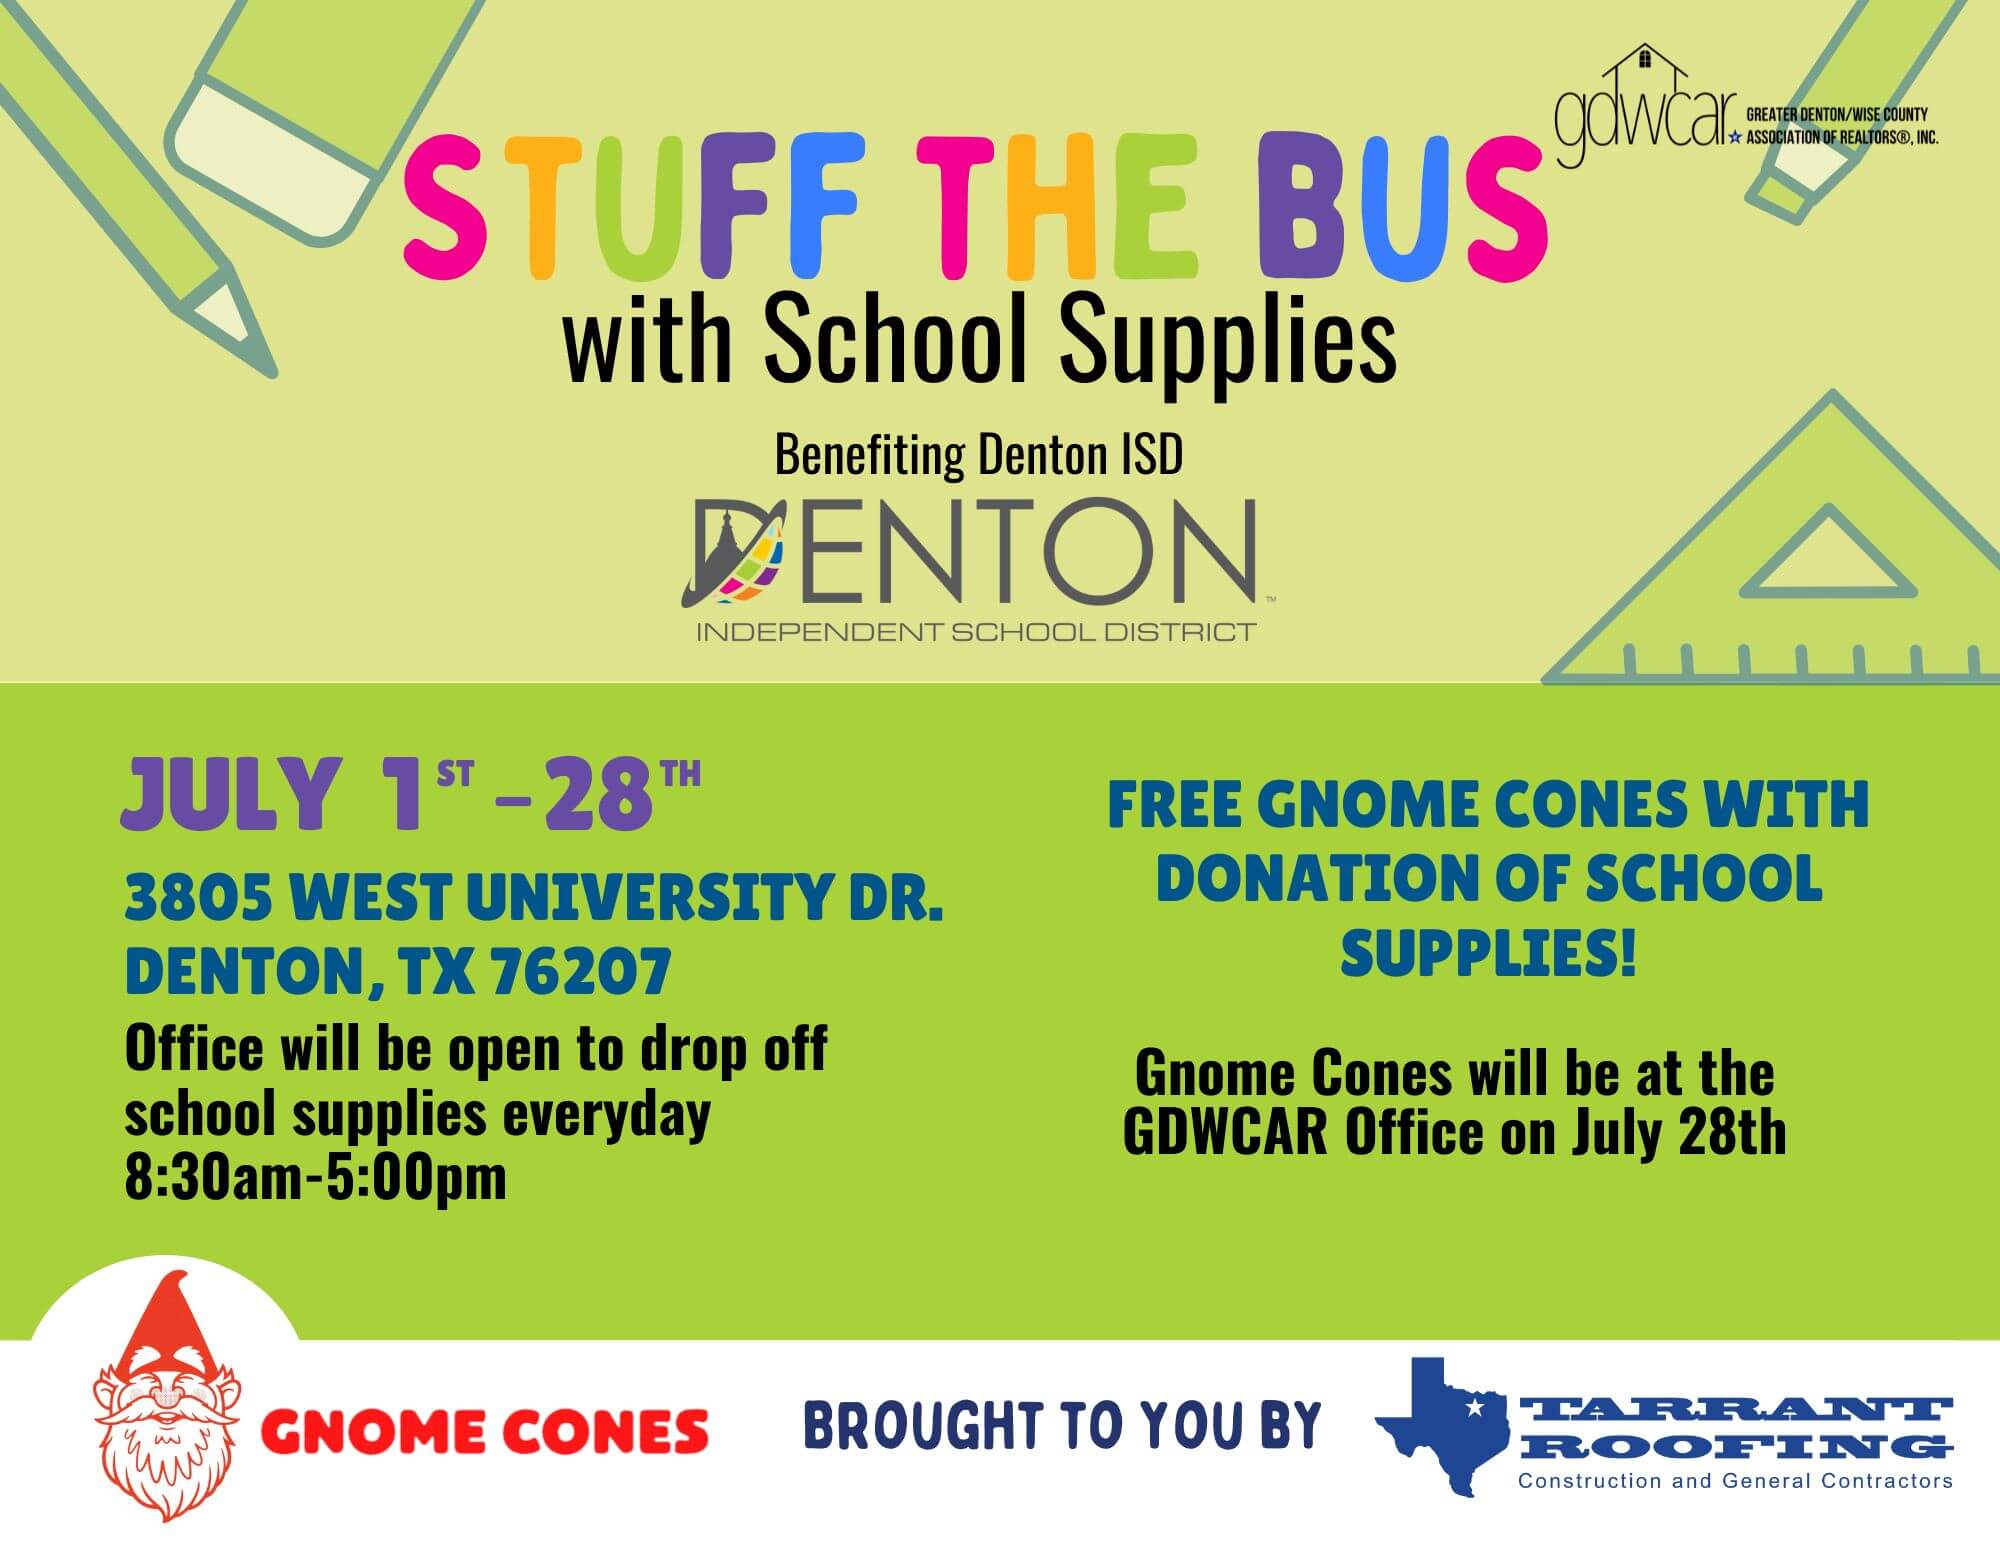 Denton ISD School Supply Drive. Free Gnome Cone treat with donation of school supplies on July 28th at our office.